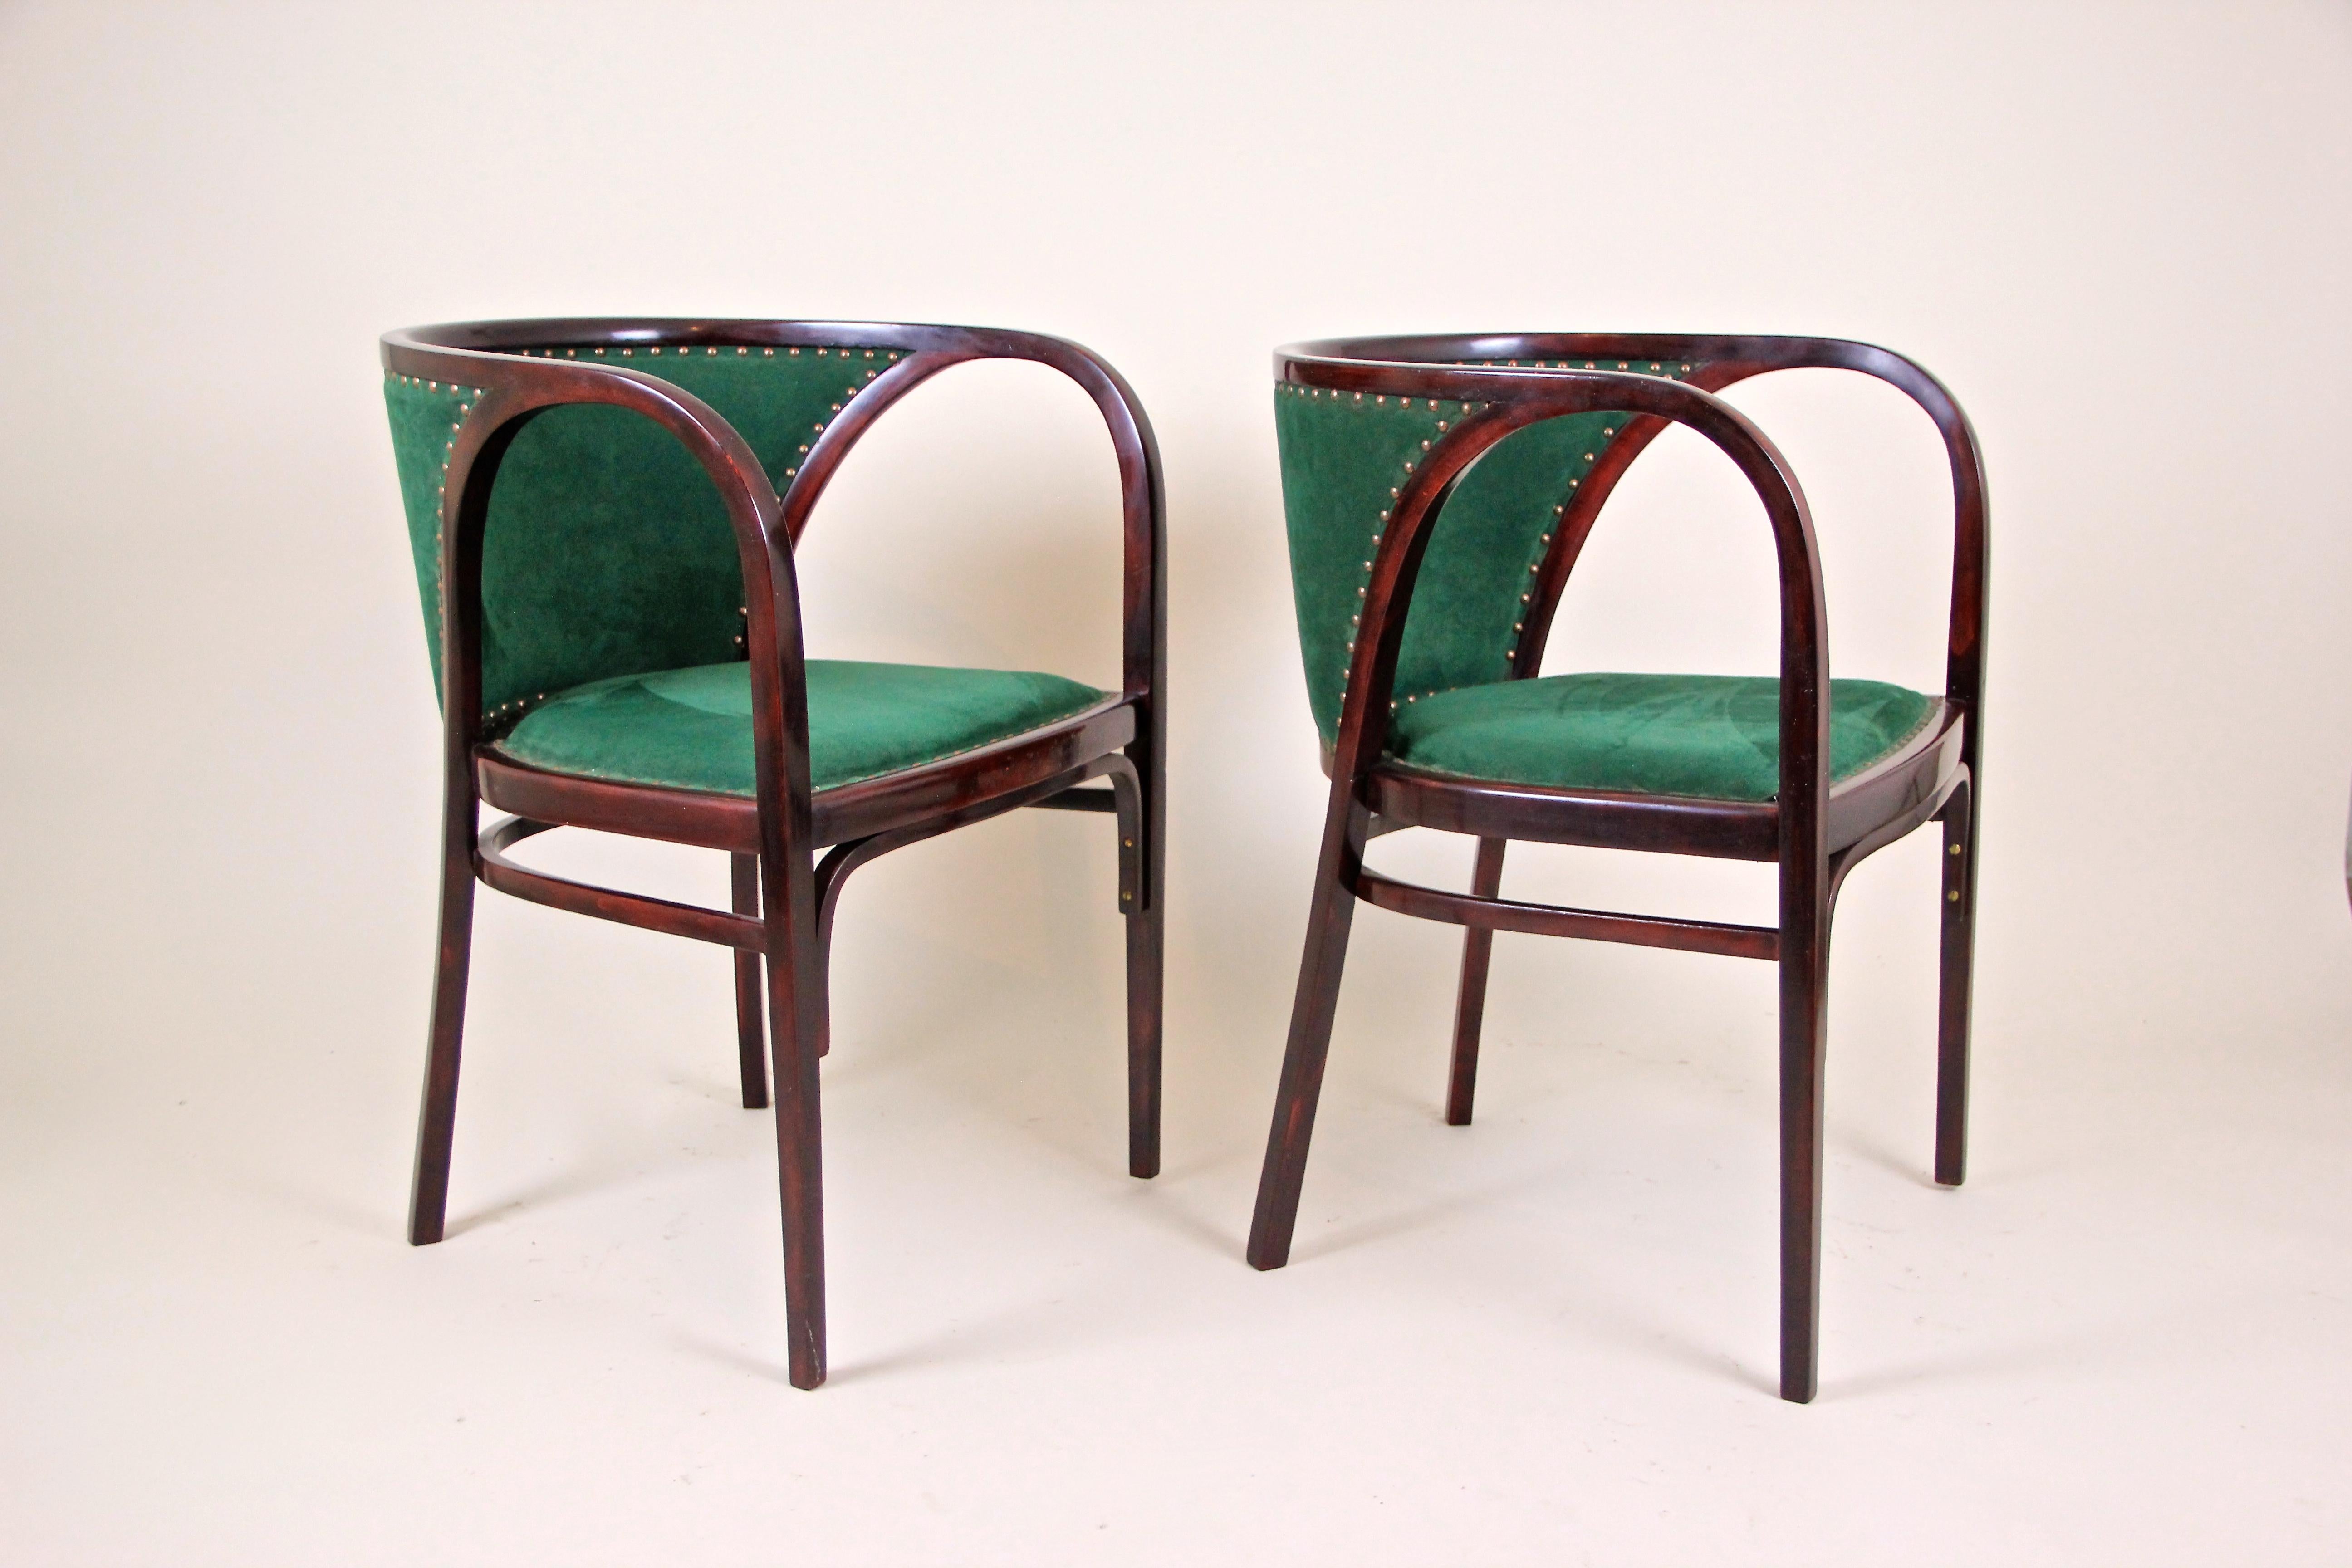 Timeless Thonet bentwood seating set or Salon Suite designed by famous austrian architect and painter Marcel Kammerer in the beginning of the 20th century around 1910. M. Kammerer was a master of form language which reflects best in this absolute